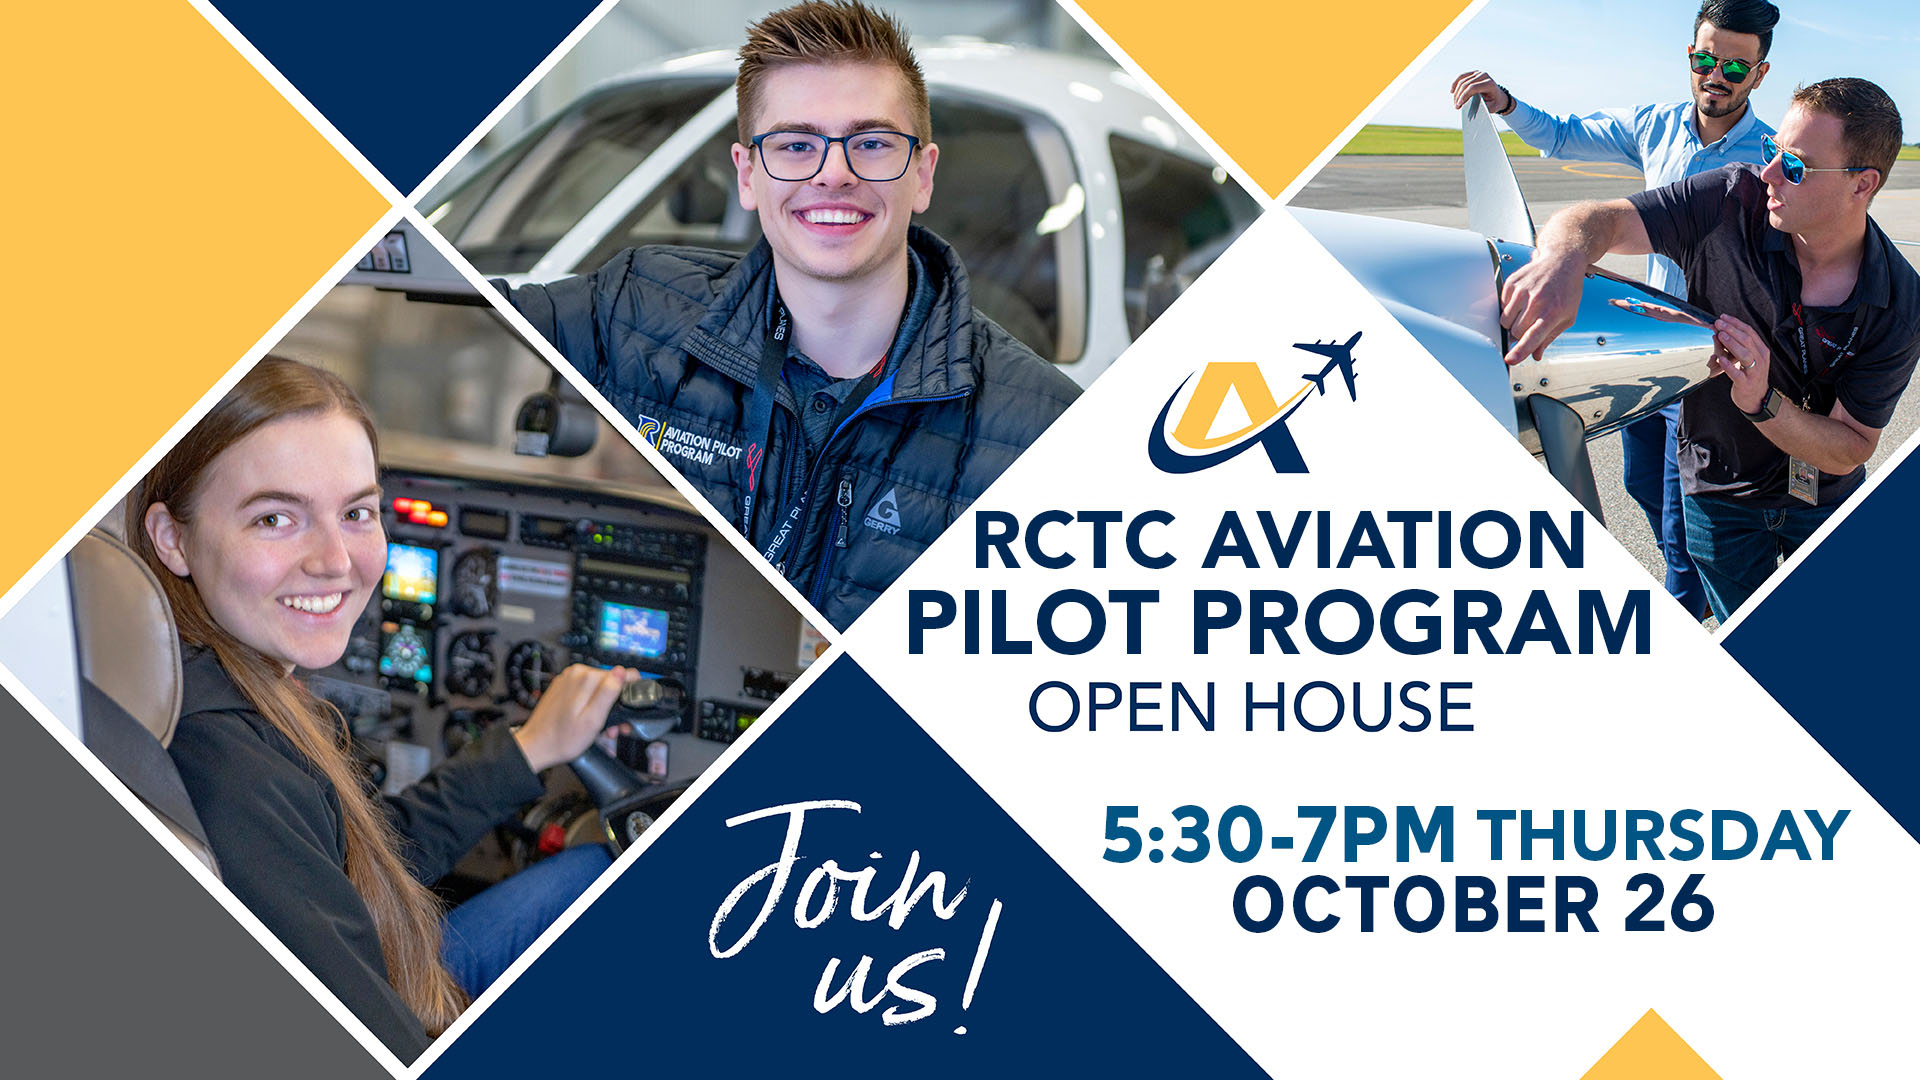 RCTC Aviation Open House